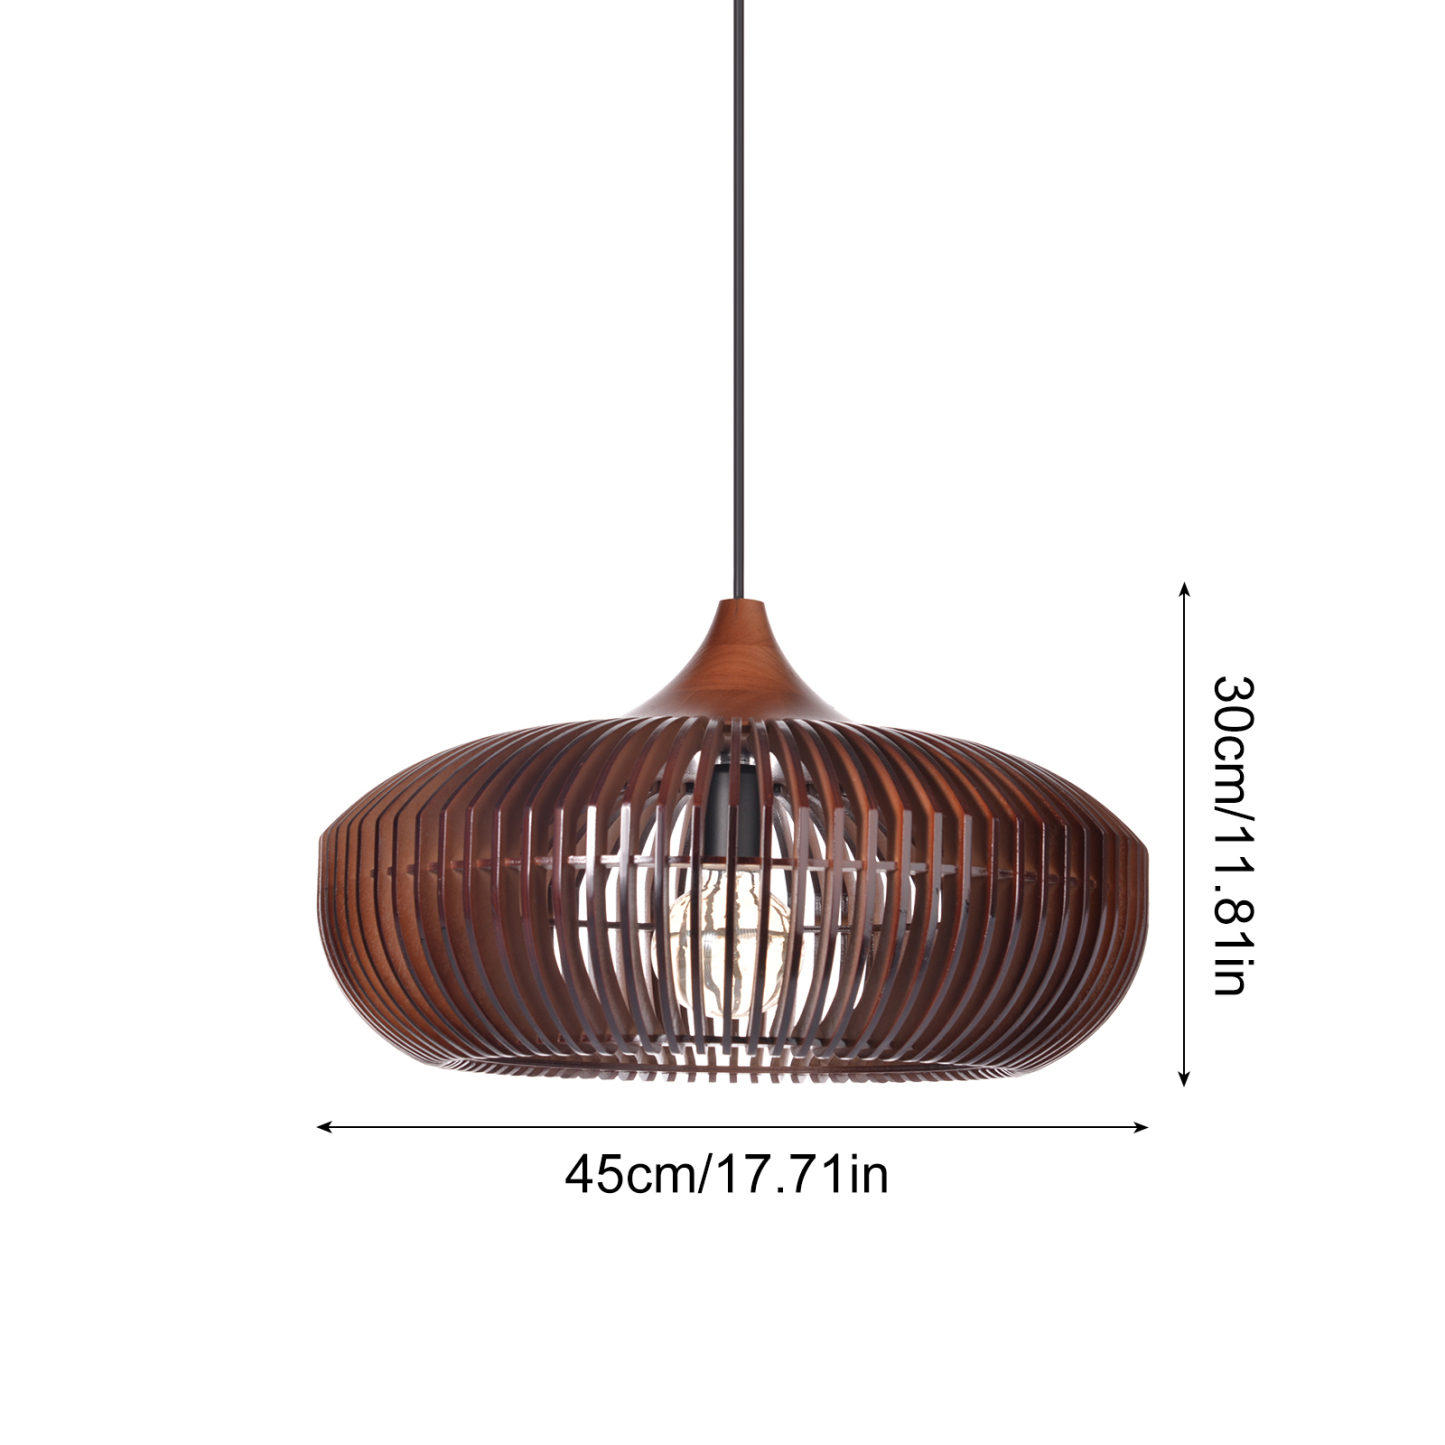 Japanese Solid Wood Dining Room High Guality Pendant Light